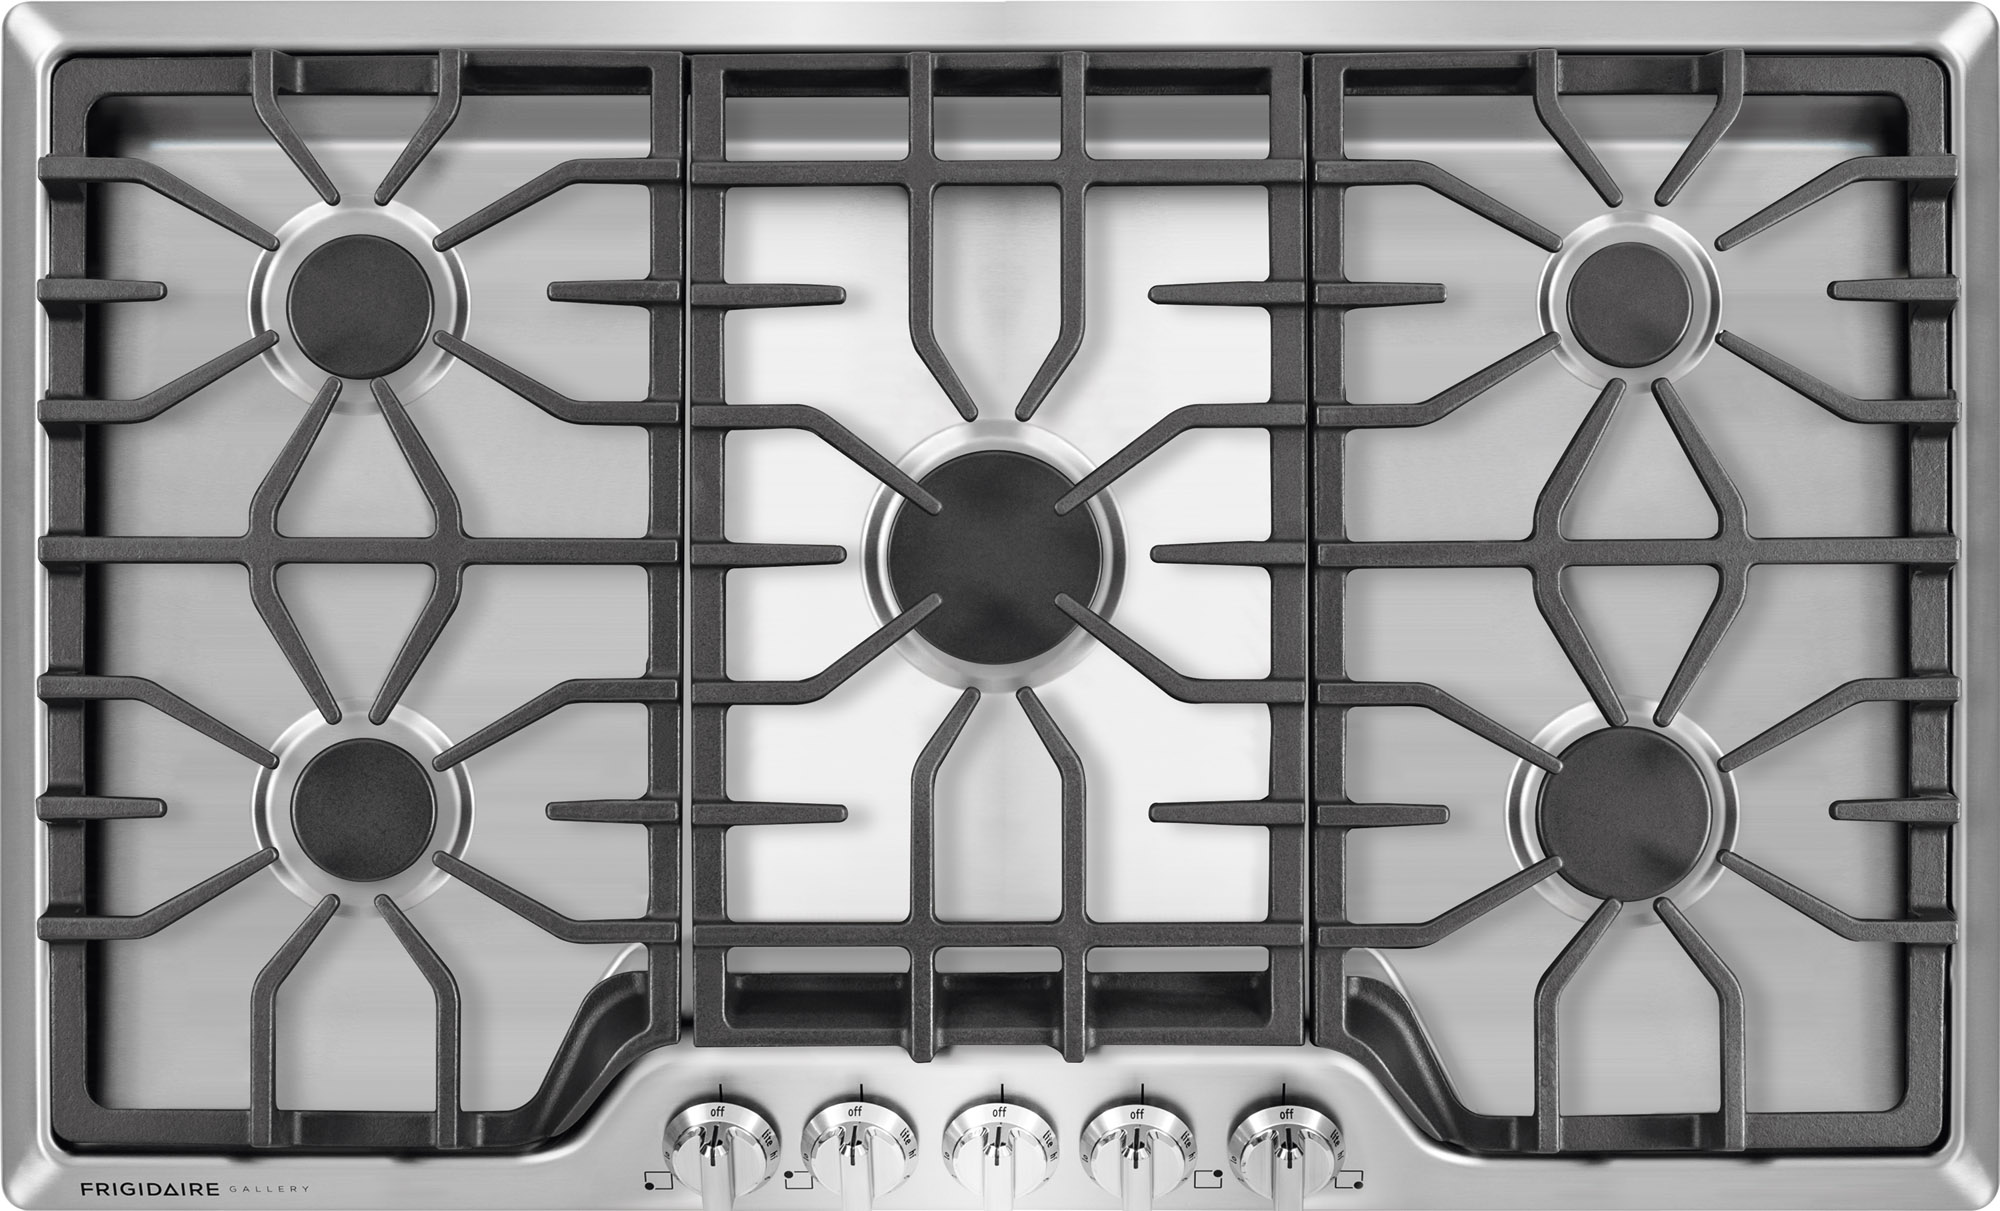 Frigidaire Gallery® 36" Stainless Steel Gas Cooktop-FGGC3645QS